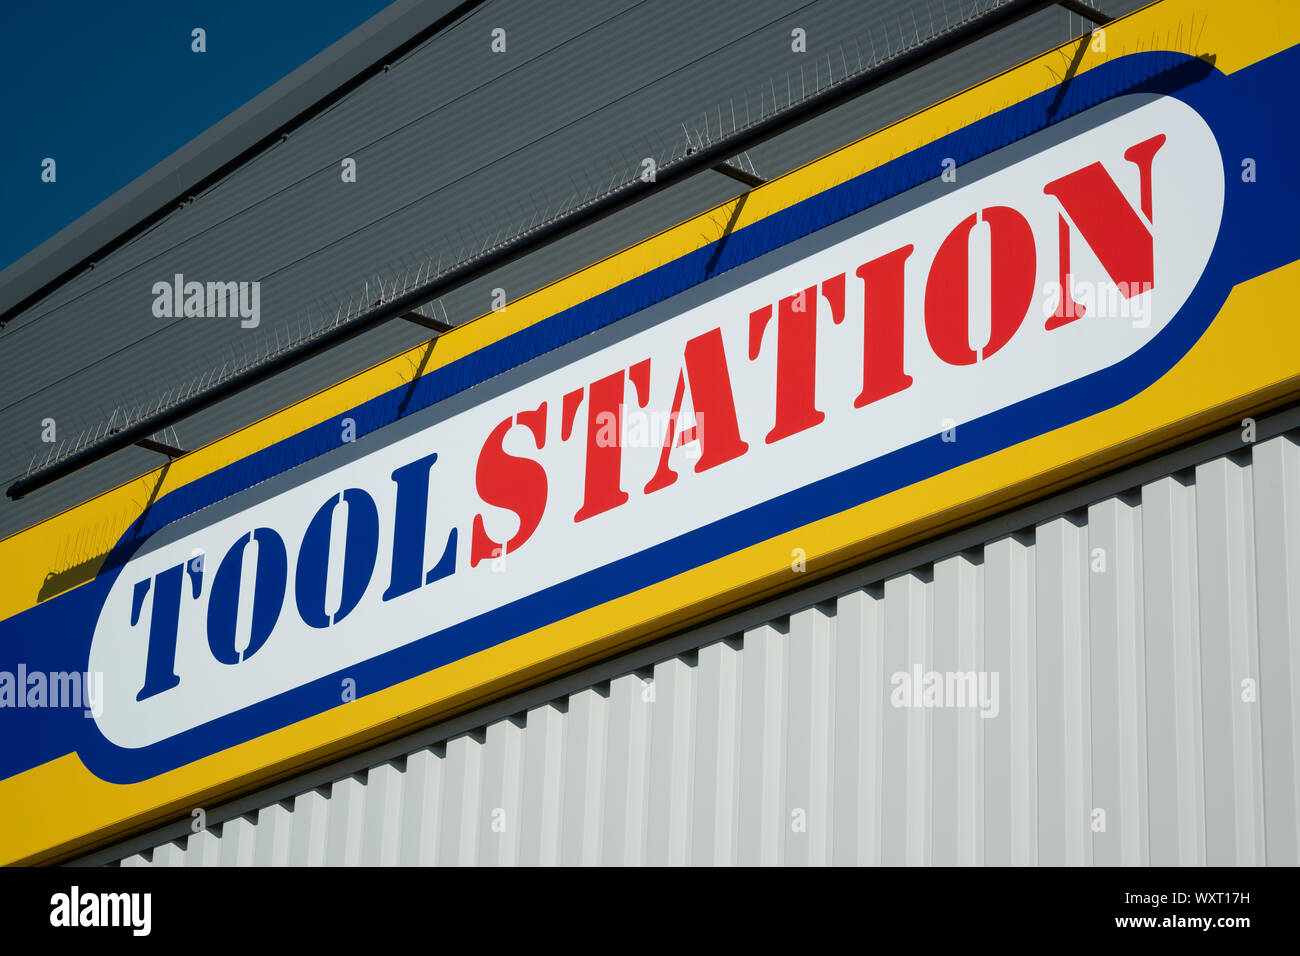 Signage indicating a branch of the chain Toolstation located in Sharston,  Manchester, UK. Stock Photo